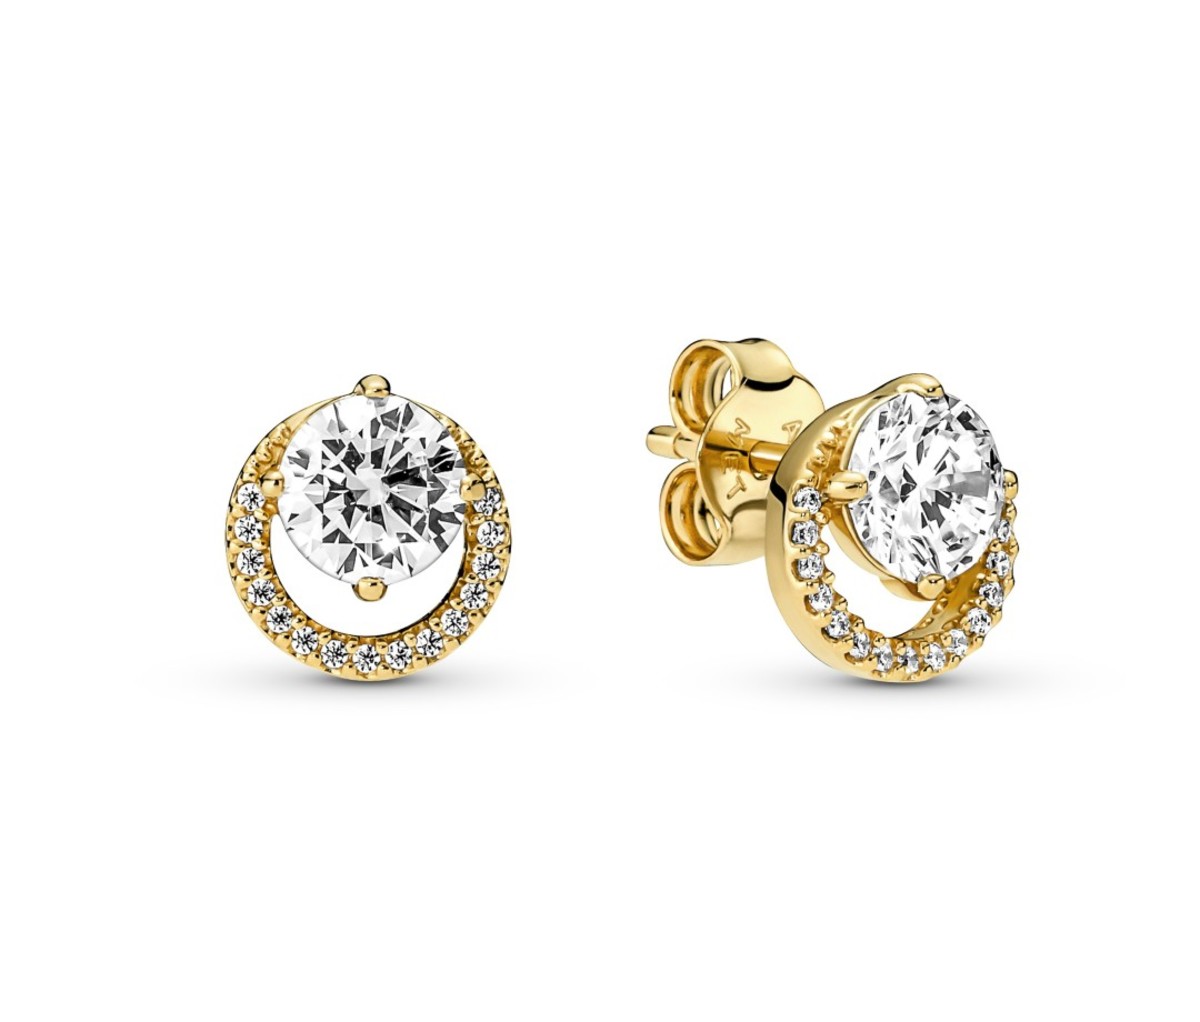 Sparkling Round Halo Stud Earrings